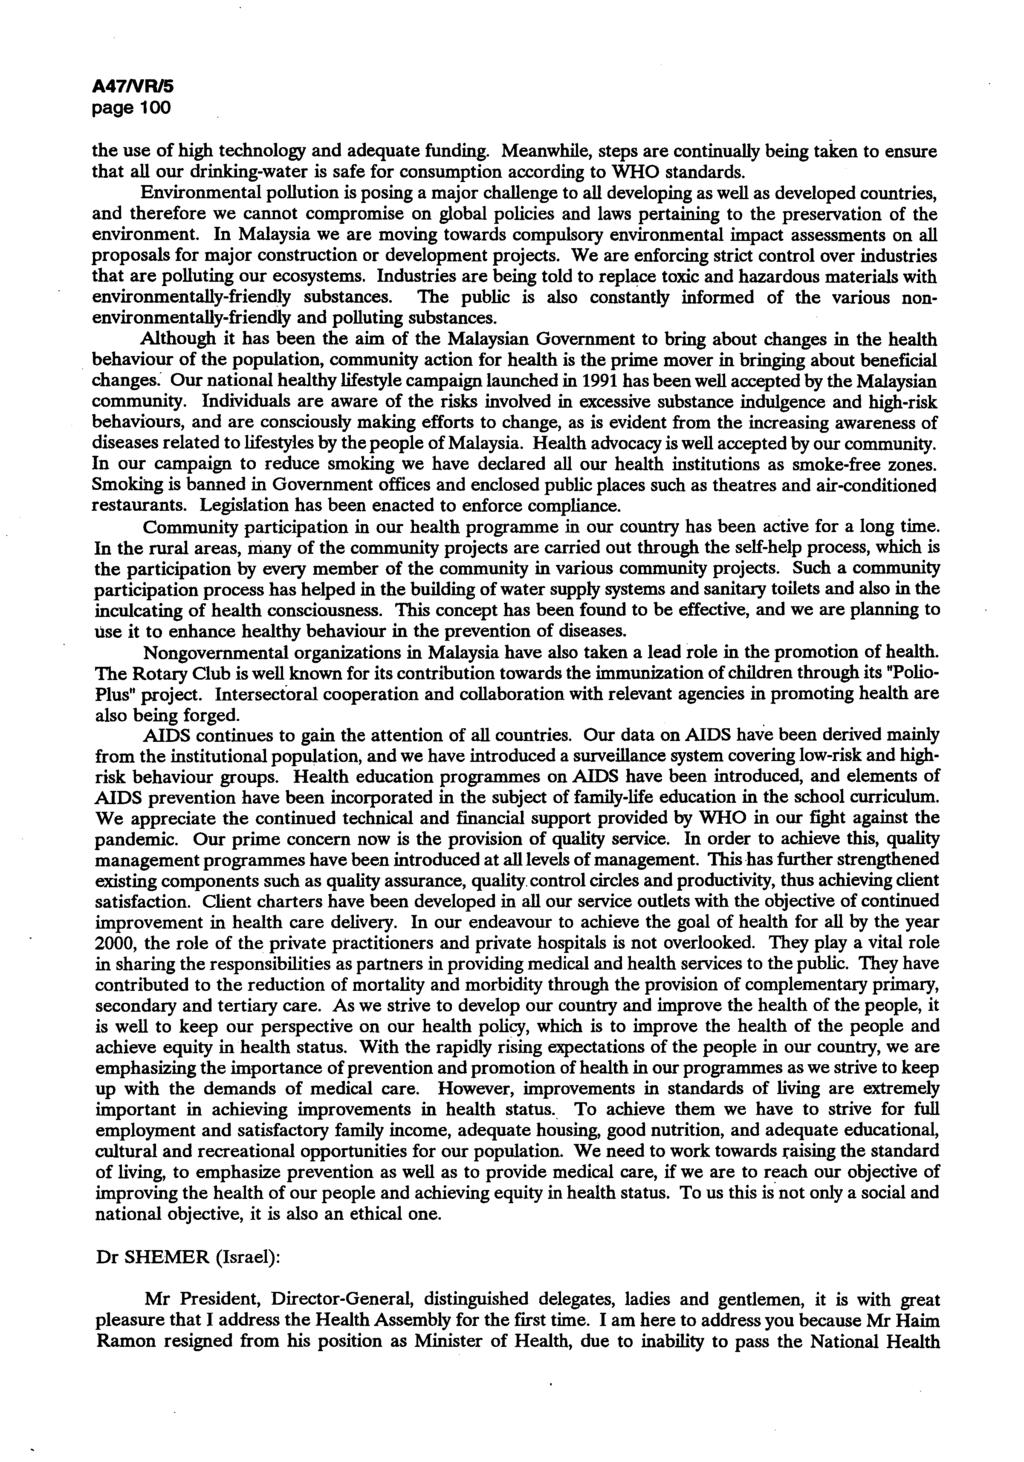 A47/VR/5 page 100 the use of high technology and adequate funding.